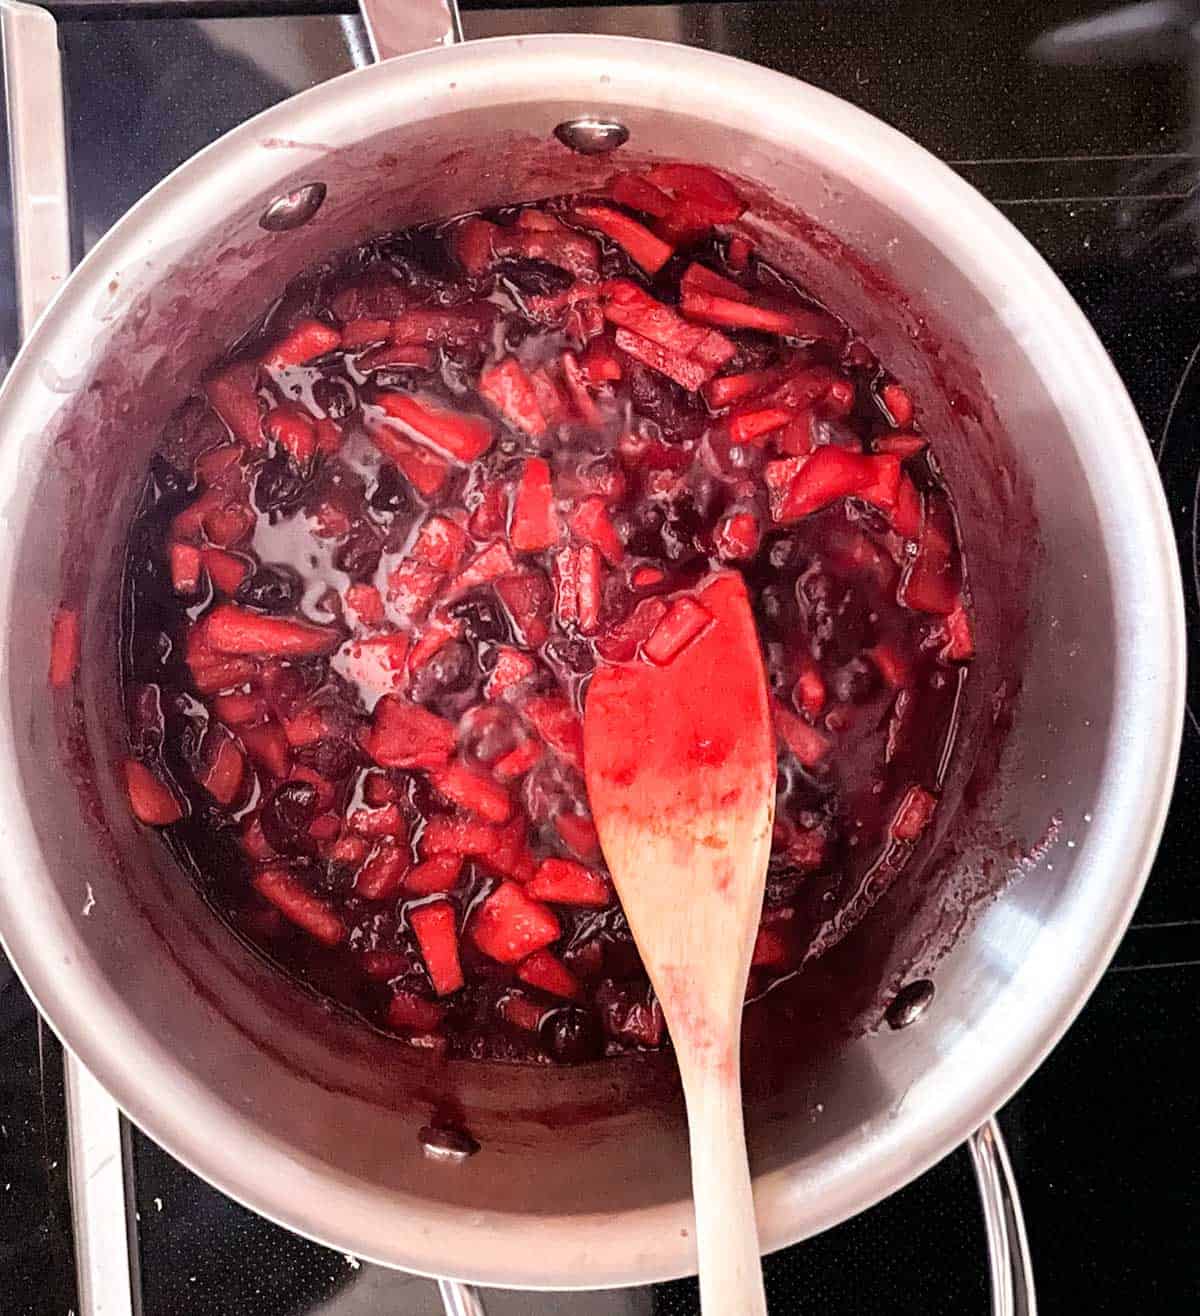 Cranberries bursting from heat of the juices and pan.